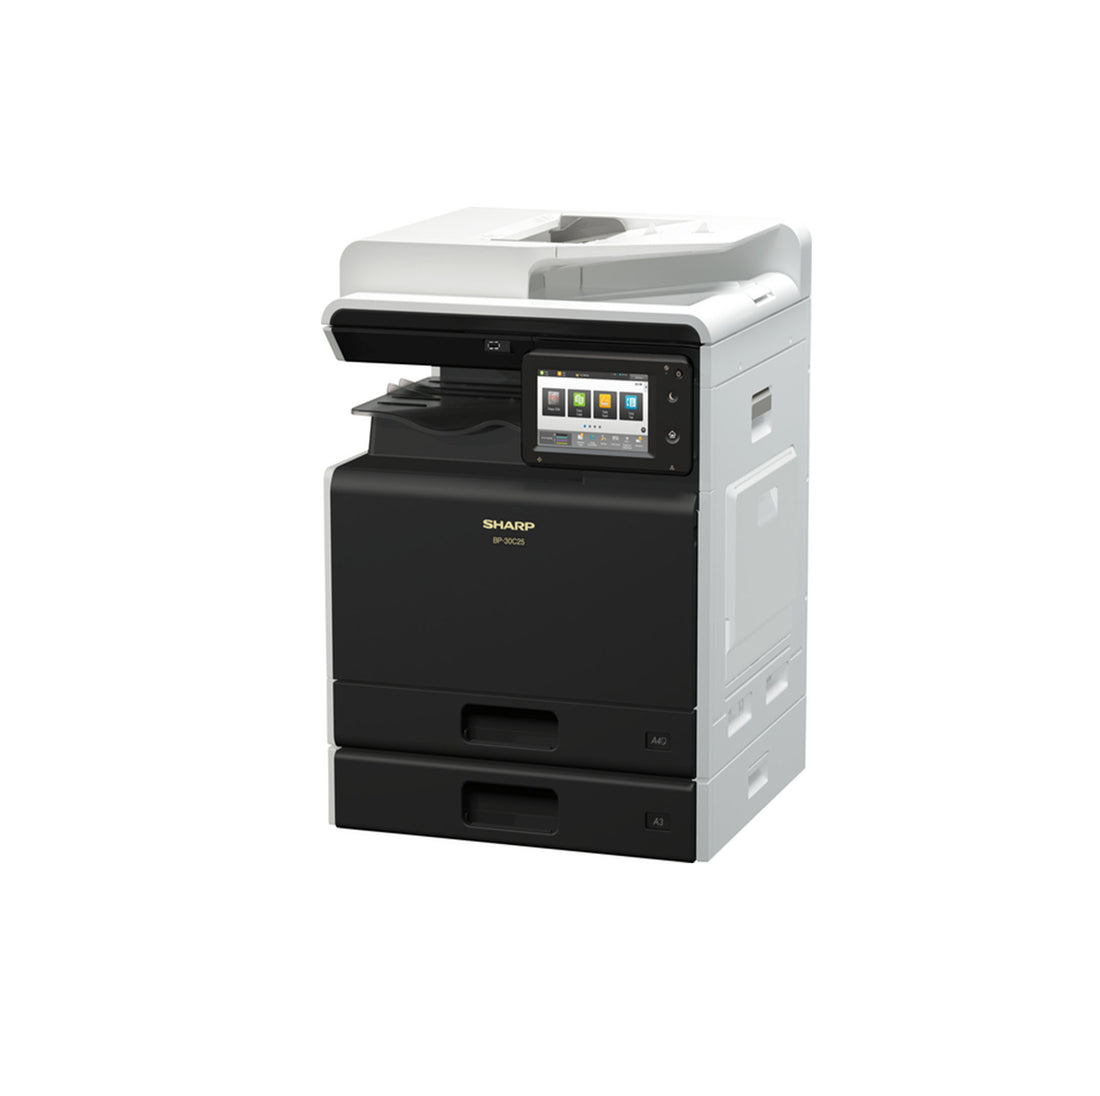 Exploring the Features and Benefits of the Sharp BP-30C25 Printer